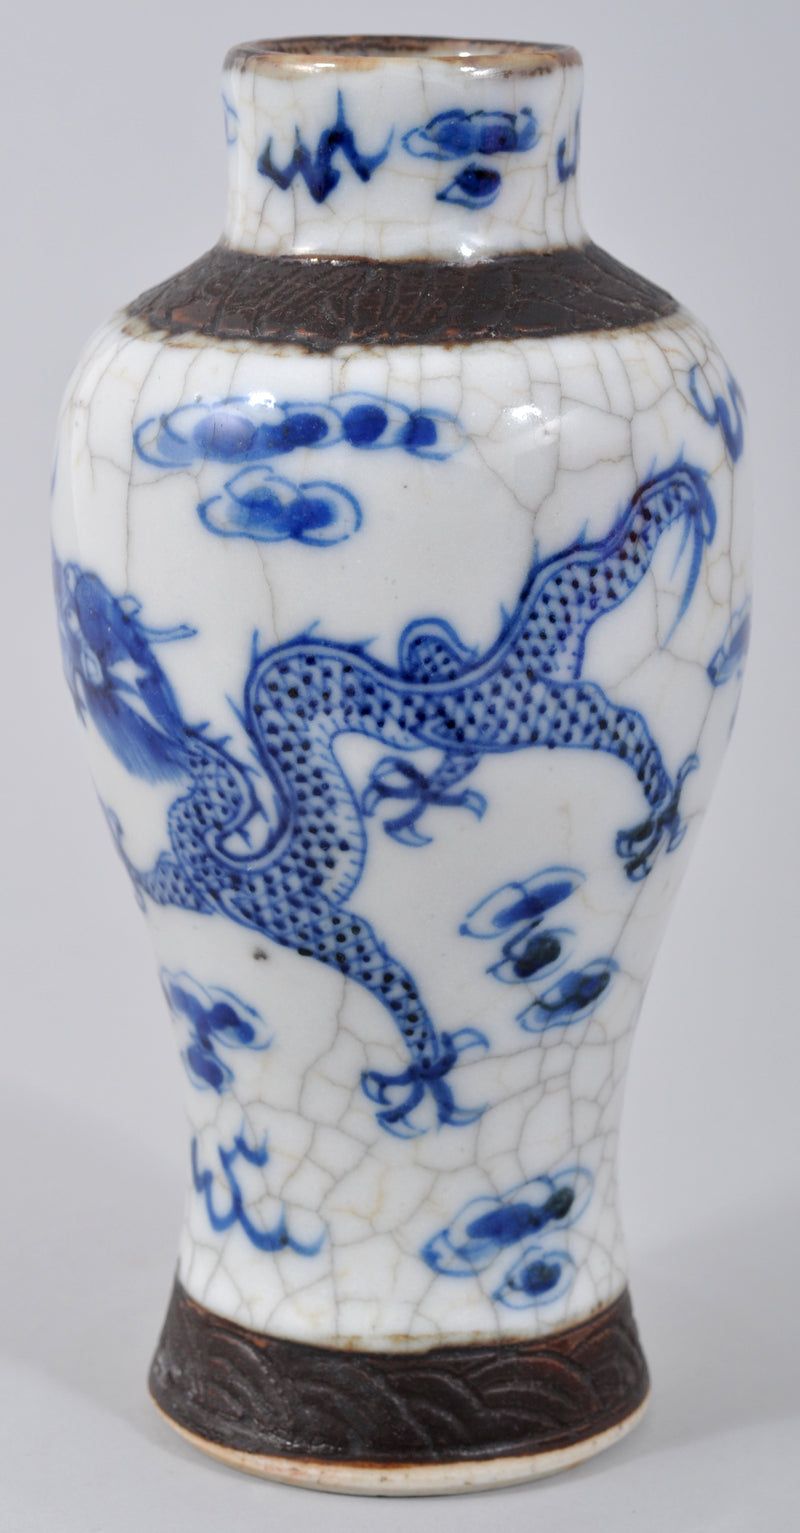 Antique 19th Century Chinese Qing Dynasty Blue and White Crackle-Glazed Vase, Circa 1850